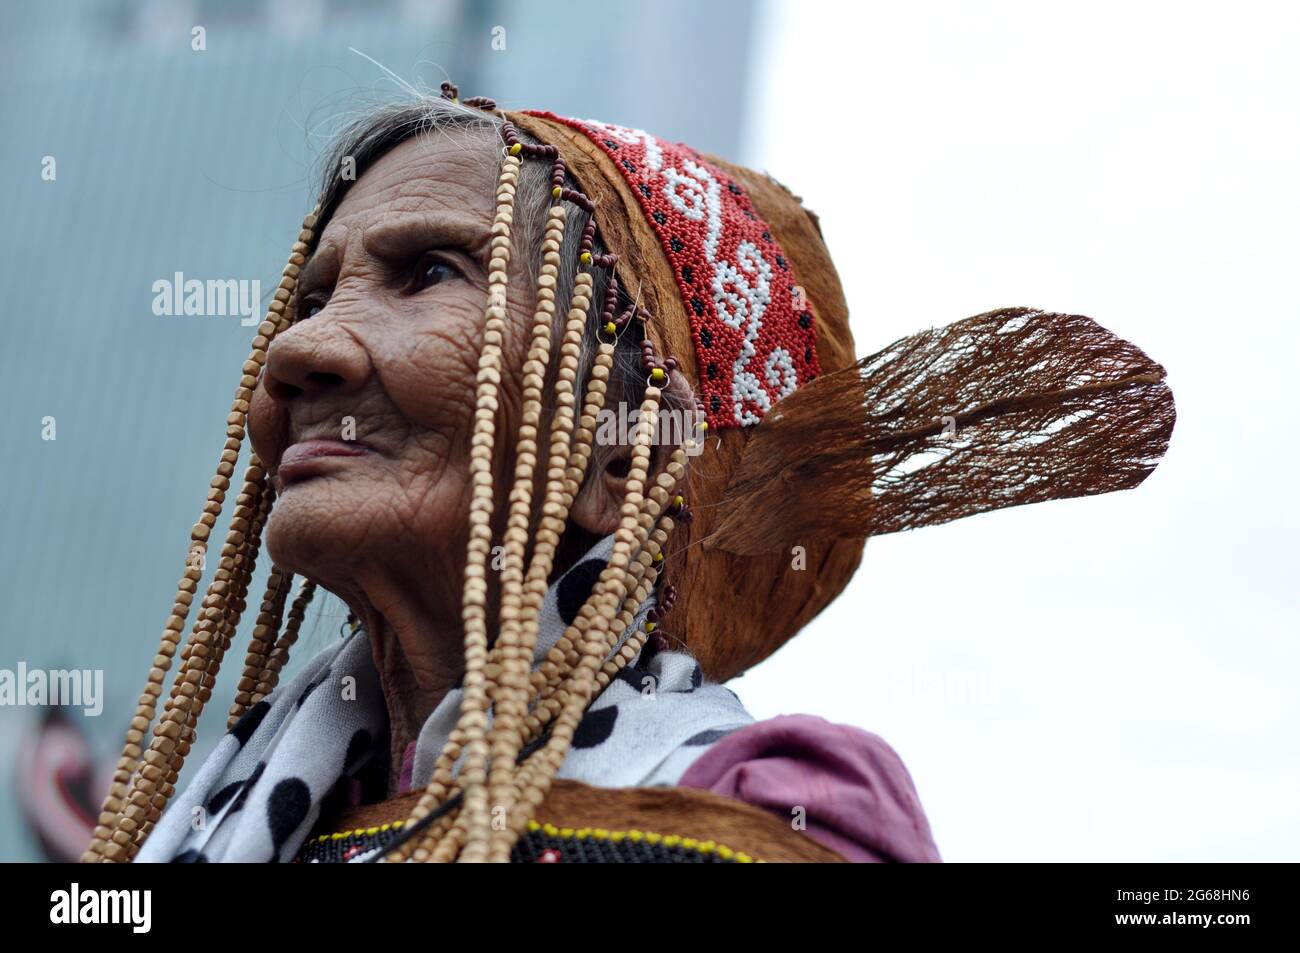 Jakarta, Indonesia - July 1, 2018: Indung Sabik, she is 128 years old from Dayak Meratus tribe was present at the Dayak Festival in Jakarta Stock Photo